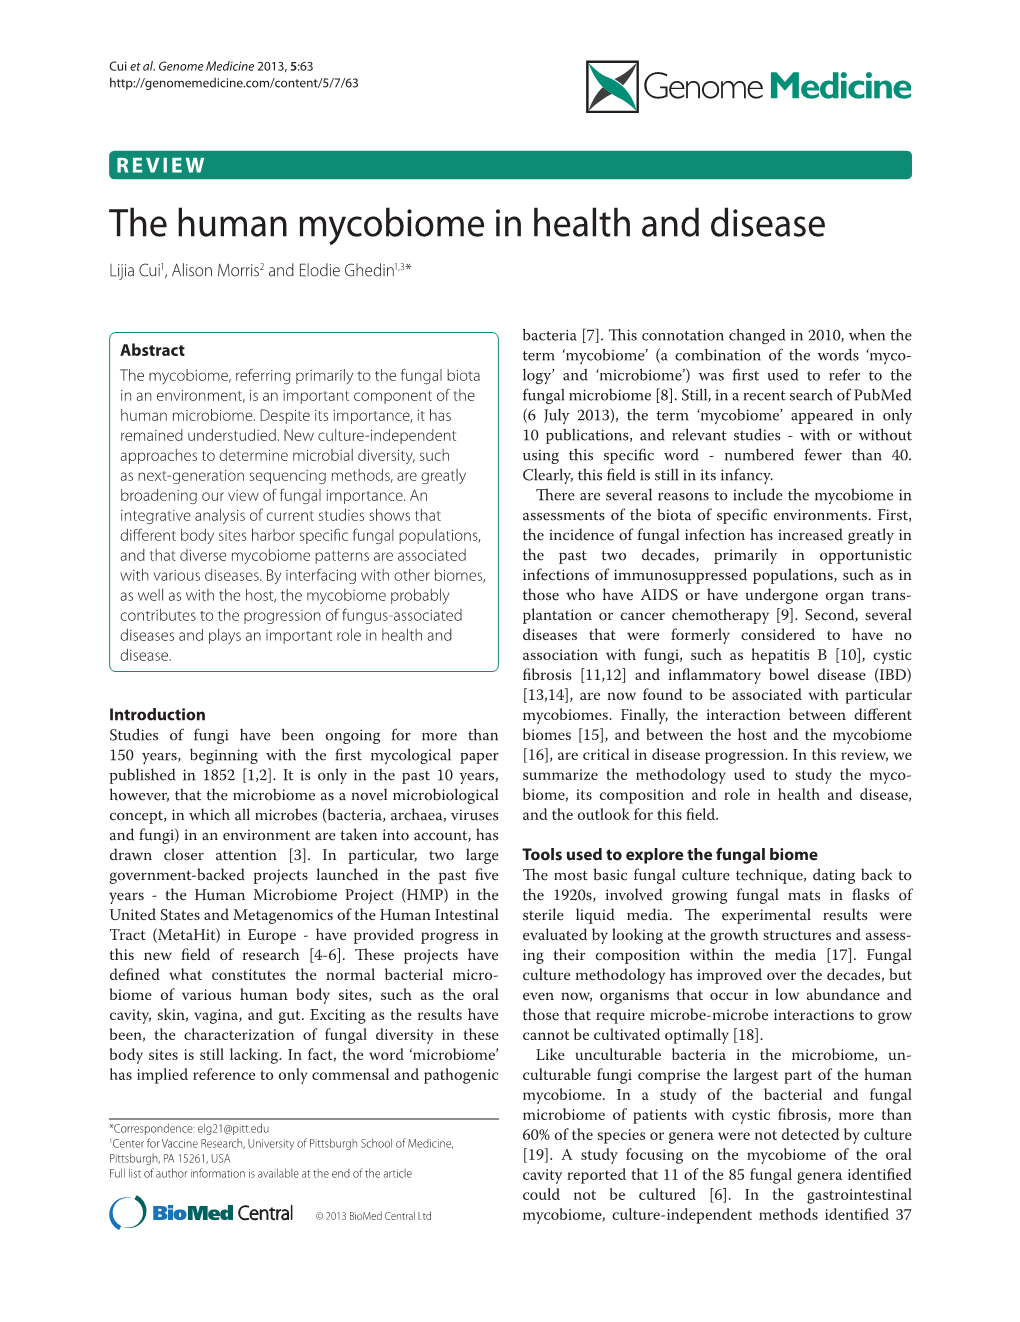 The Human Mycobiome in Health and Disease Lijia Cui1, Alison Morris2 and Elodie Ghedin1,3*